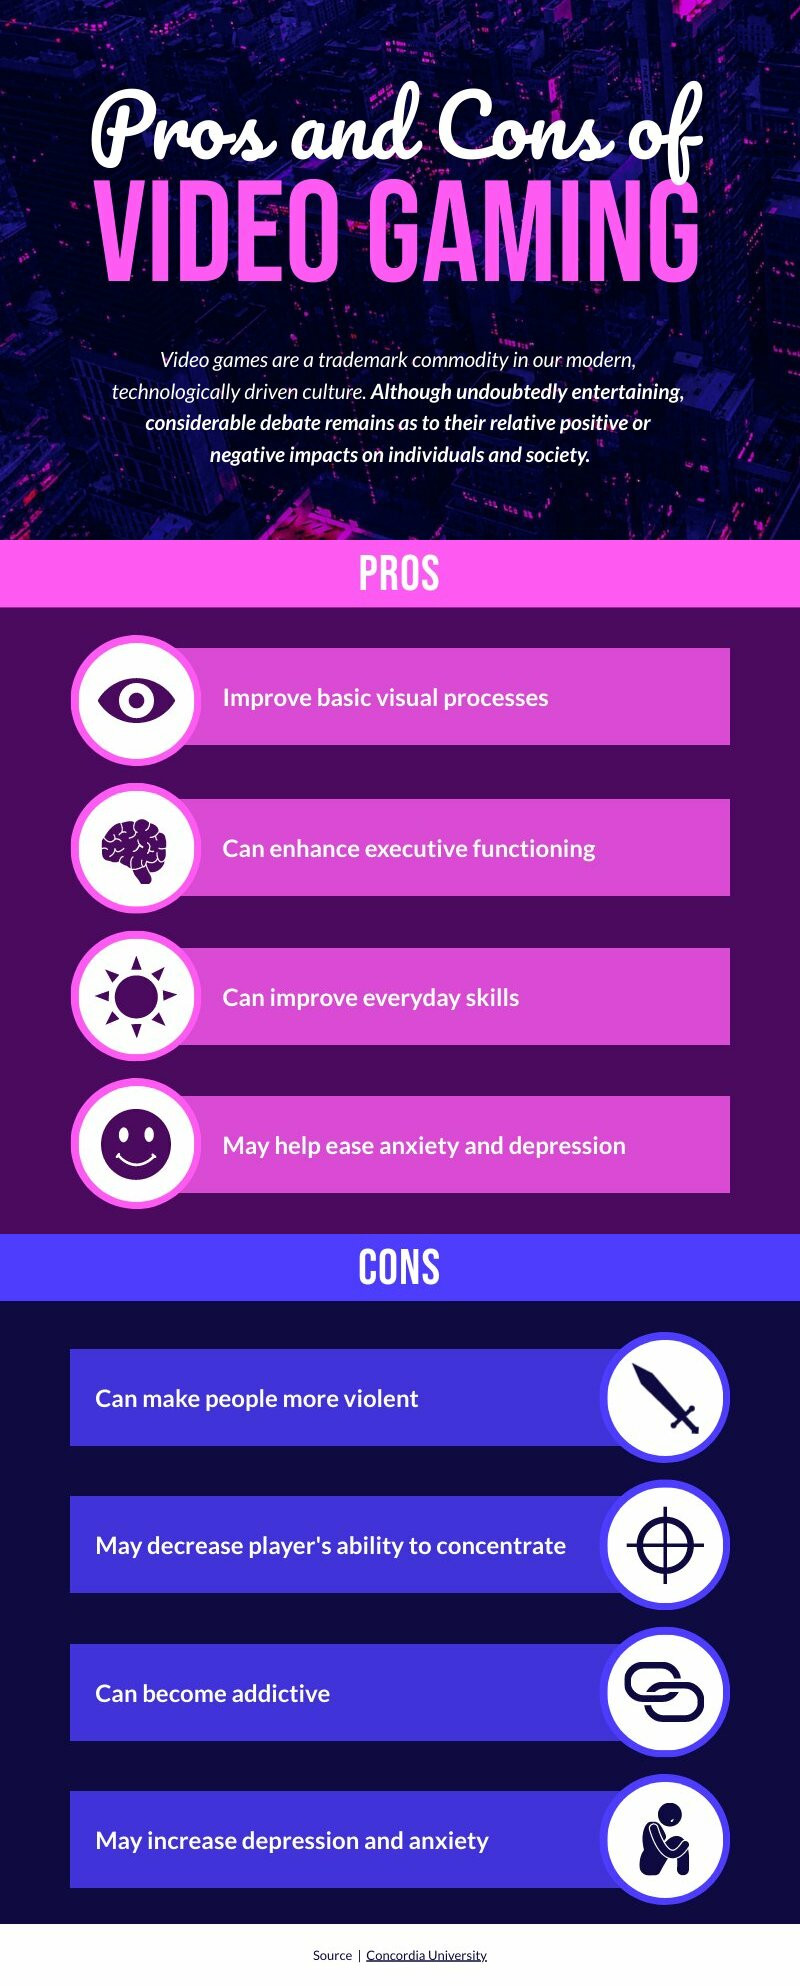 Pros and Cons of Video Gaming